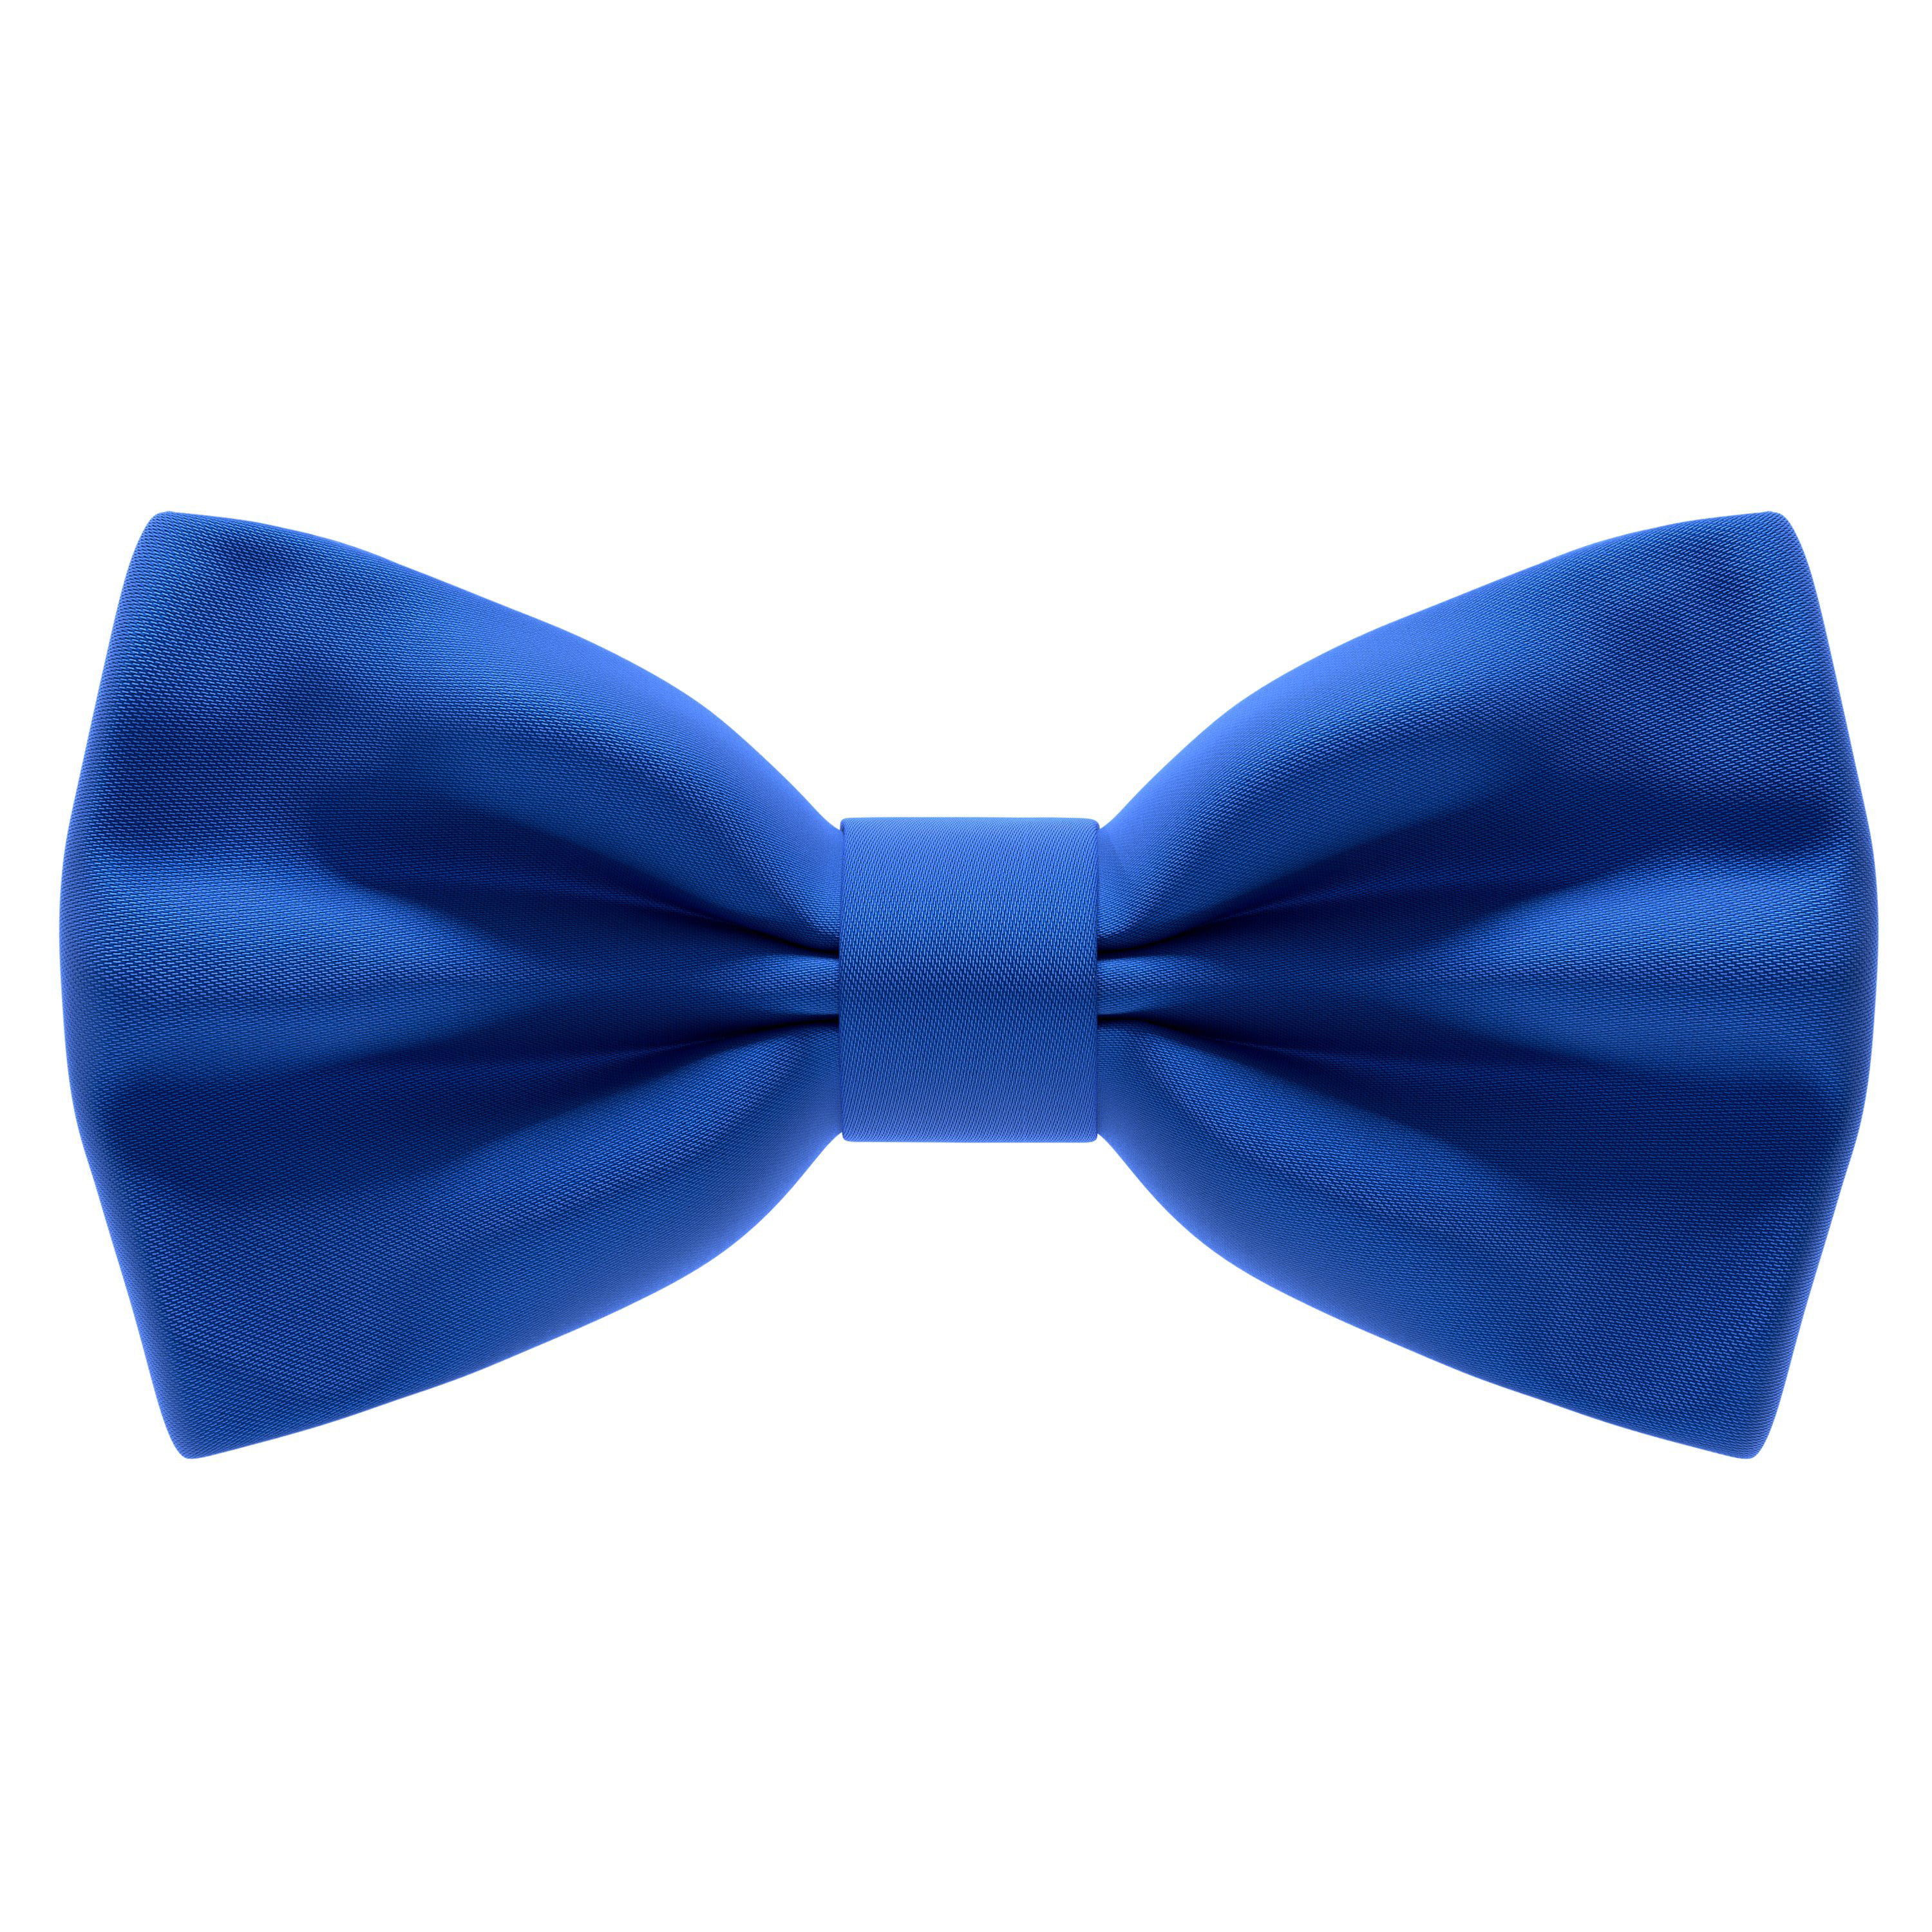 Royal BLUE Adjustable Bow Tie Pre-Tied Classic Tuxedo Party SATIN 